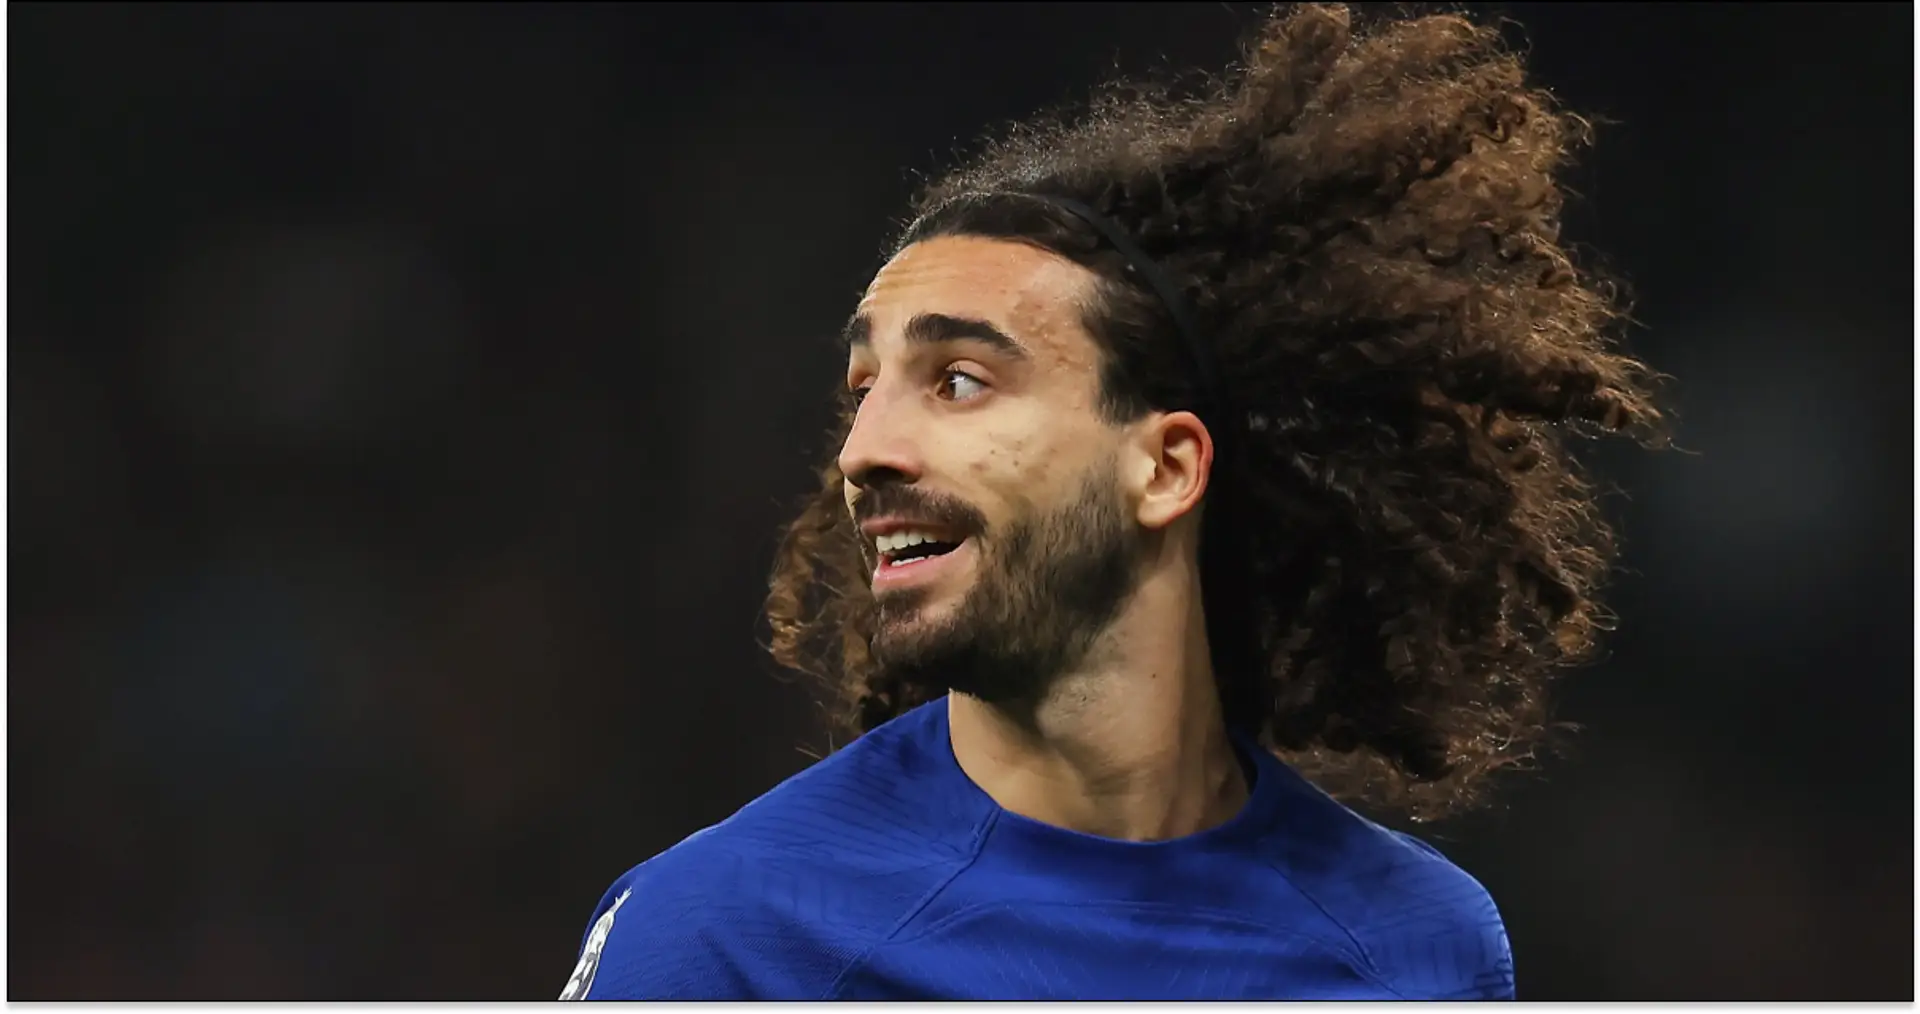 'Will continue his Cafurella redemption arc': Chelsea fans react as Cucurella steps up recovery